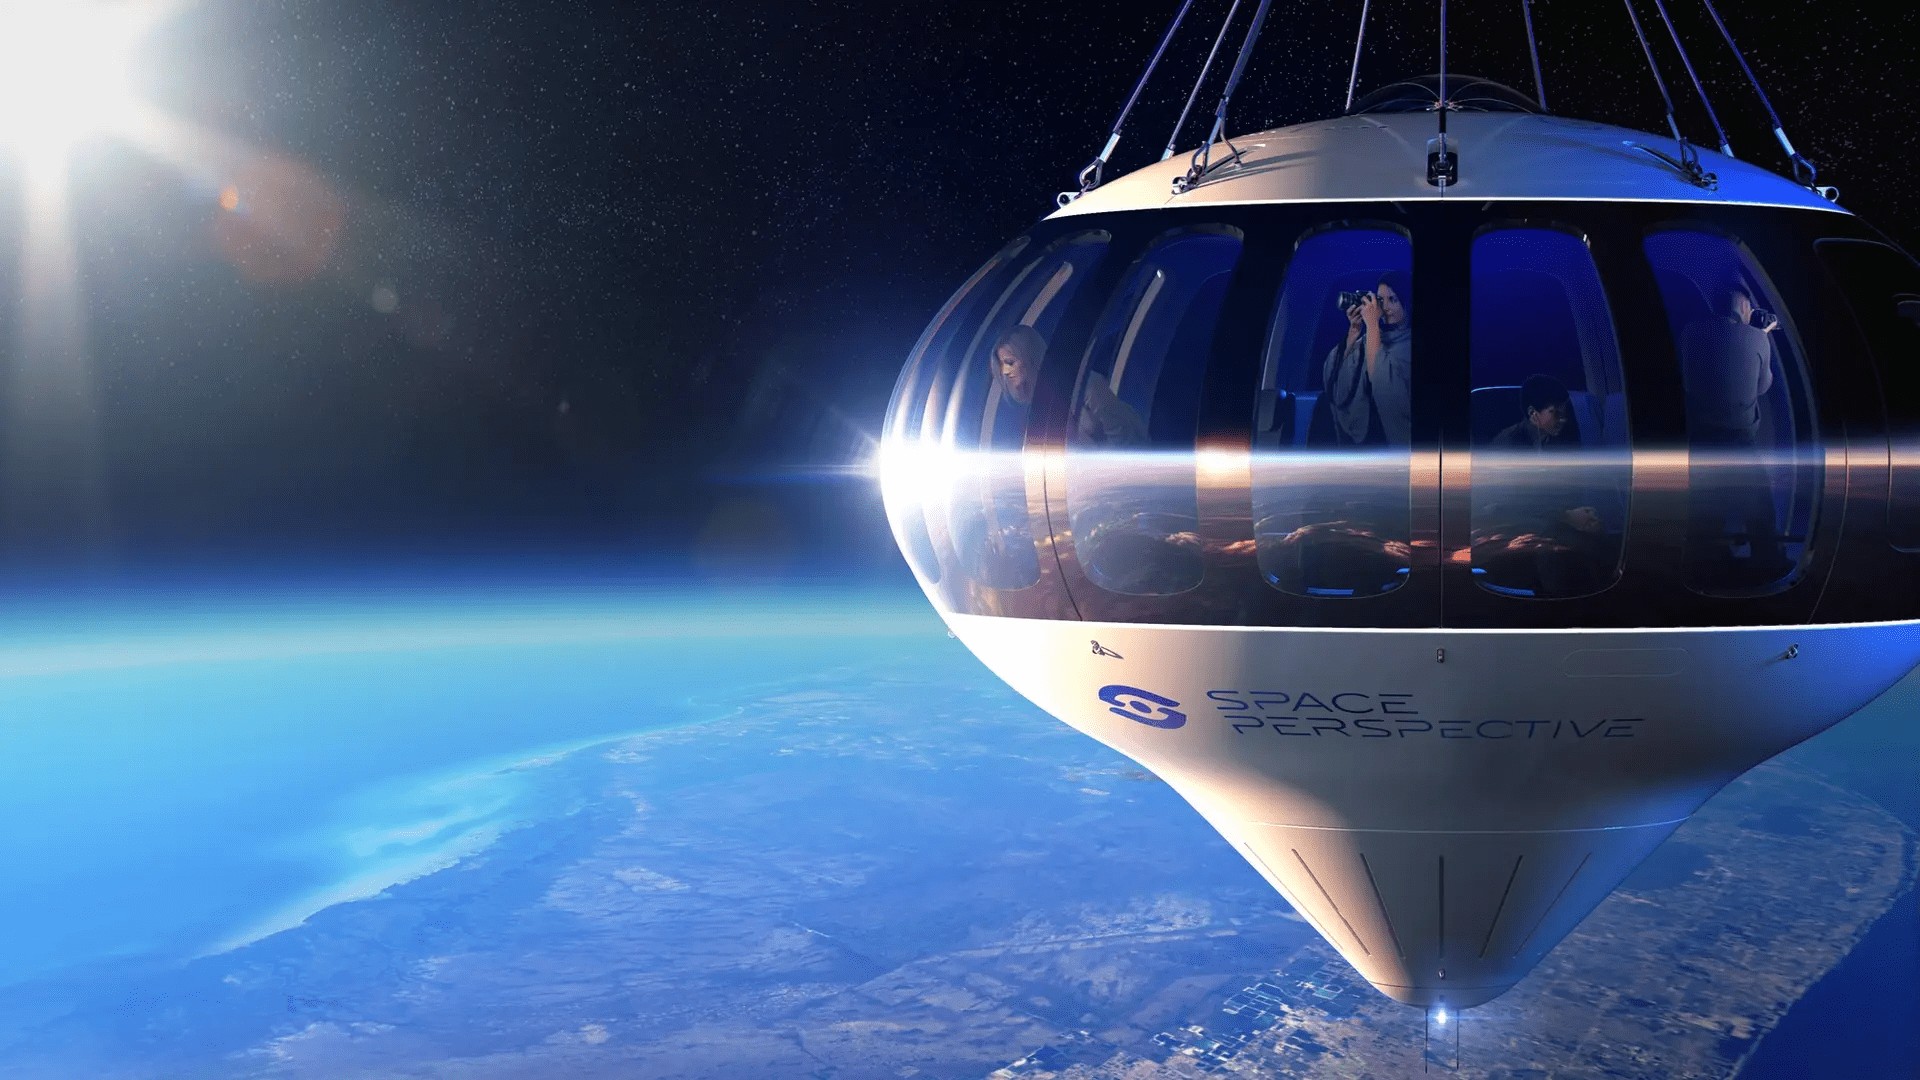 Presales are underway for a six-hour flight to “space” on a hot air balloon